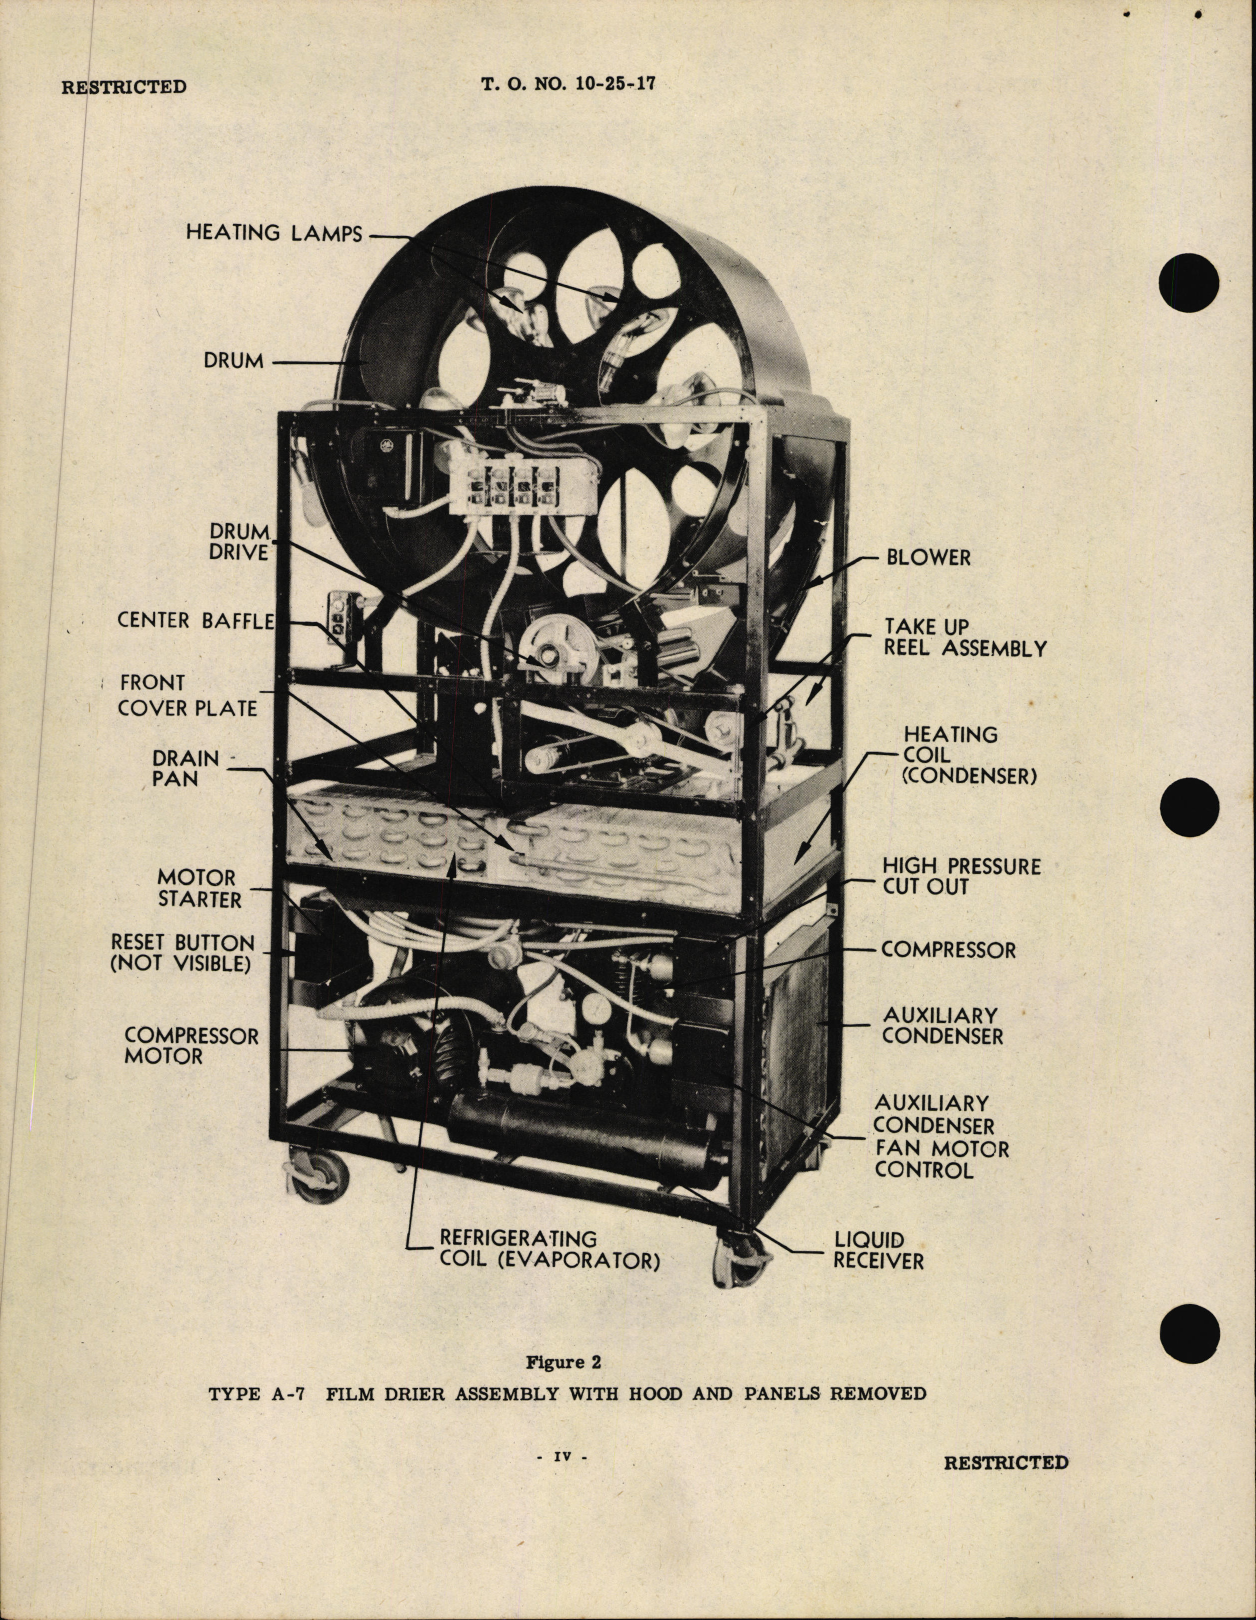 Sample page 6 from AirCorps Library document: Handbook of Instructions with Parts Catalog for Type A-7 Roll Film Dryer